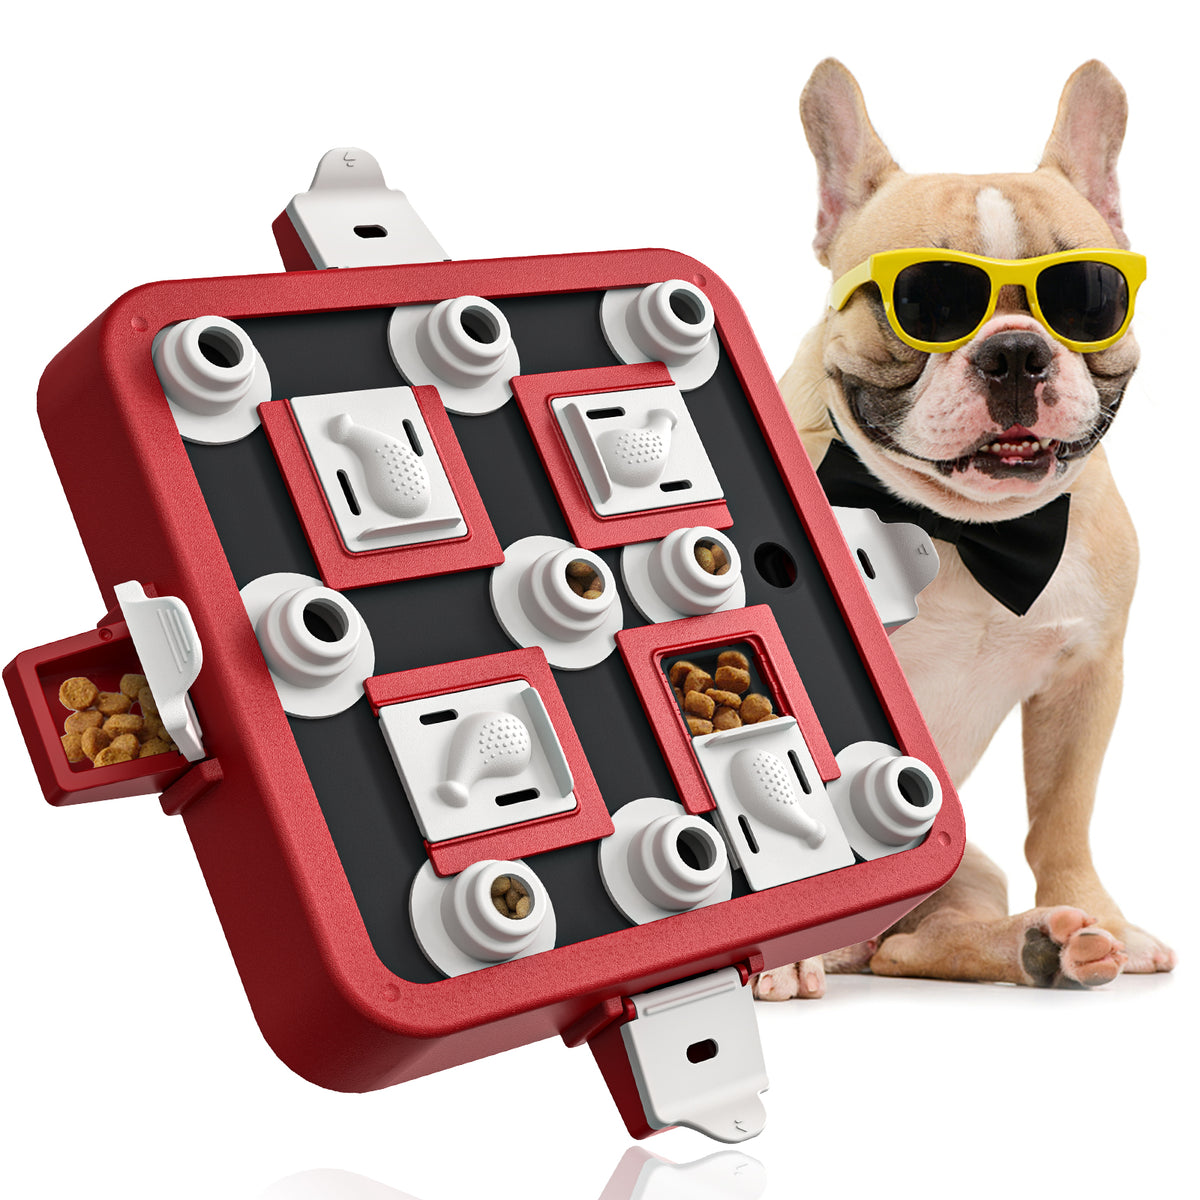 KADTC Dog Puzzle Toy For Small/Medium/Large Dogs Mental Stimulation Boredom busters Puppy Brain Toys Keep Busy Enrichment Puzzles Feeder Food Treat Interactive Level 3 2 1 Mentally Stimulating Games